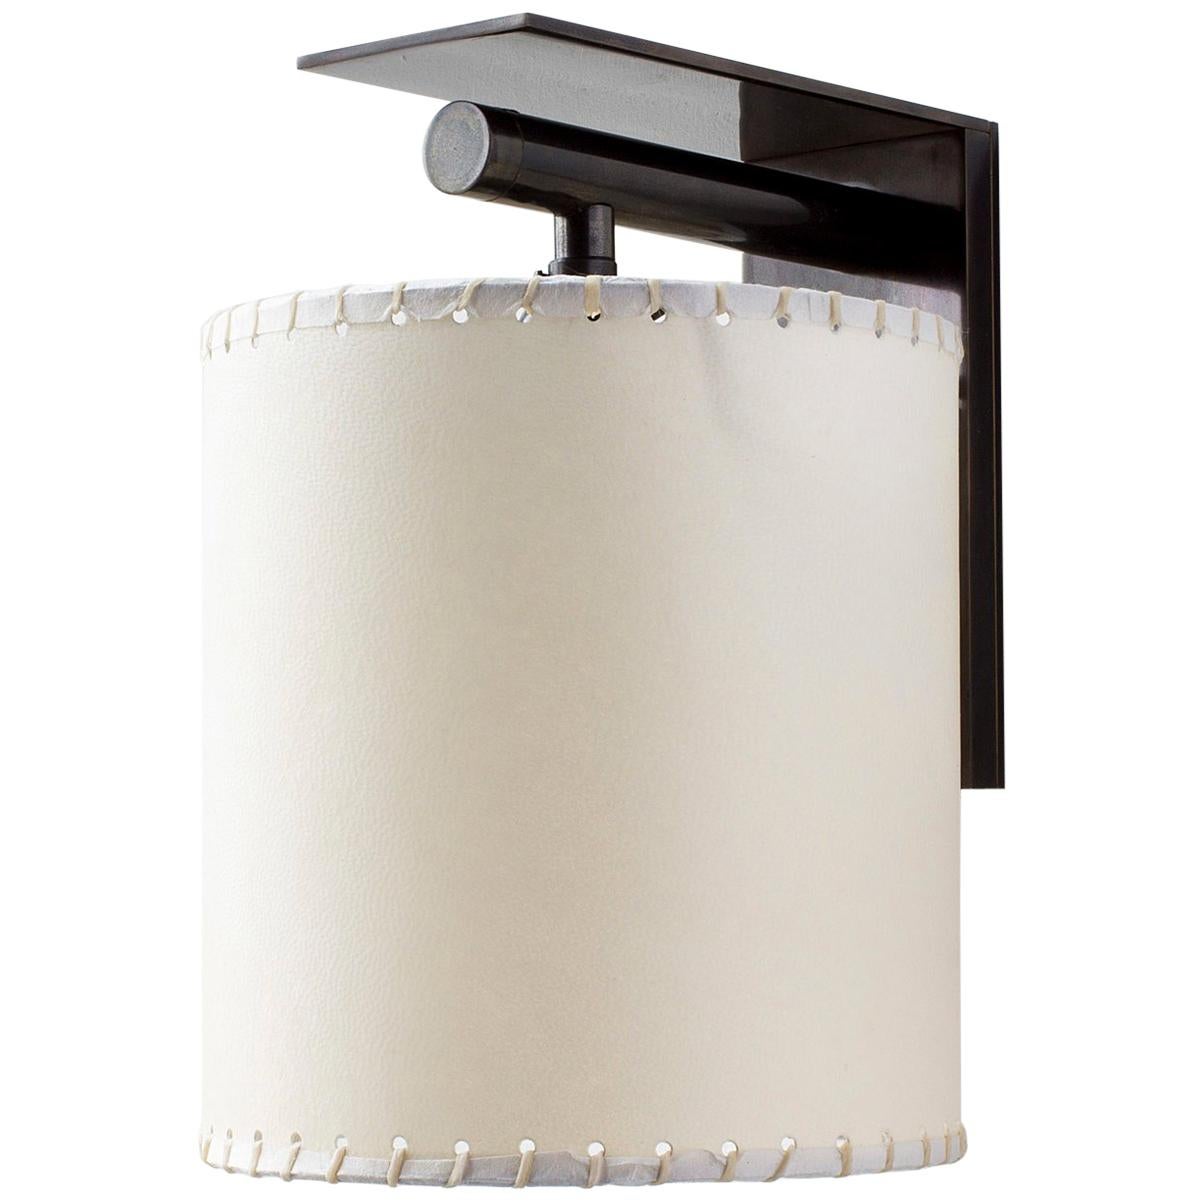 Series02 Large Sconce, Dark Patinated Brass, Stitched Goatskin Parchment Shade